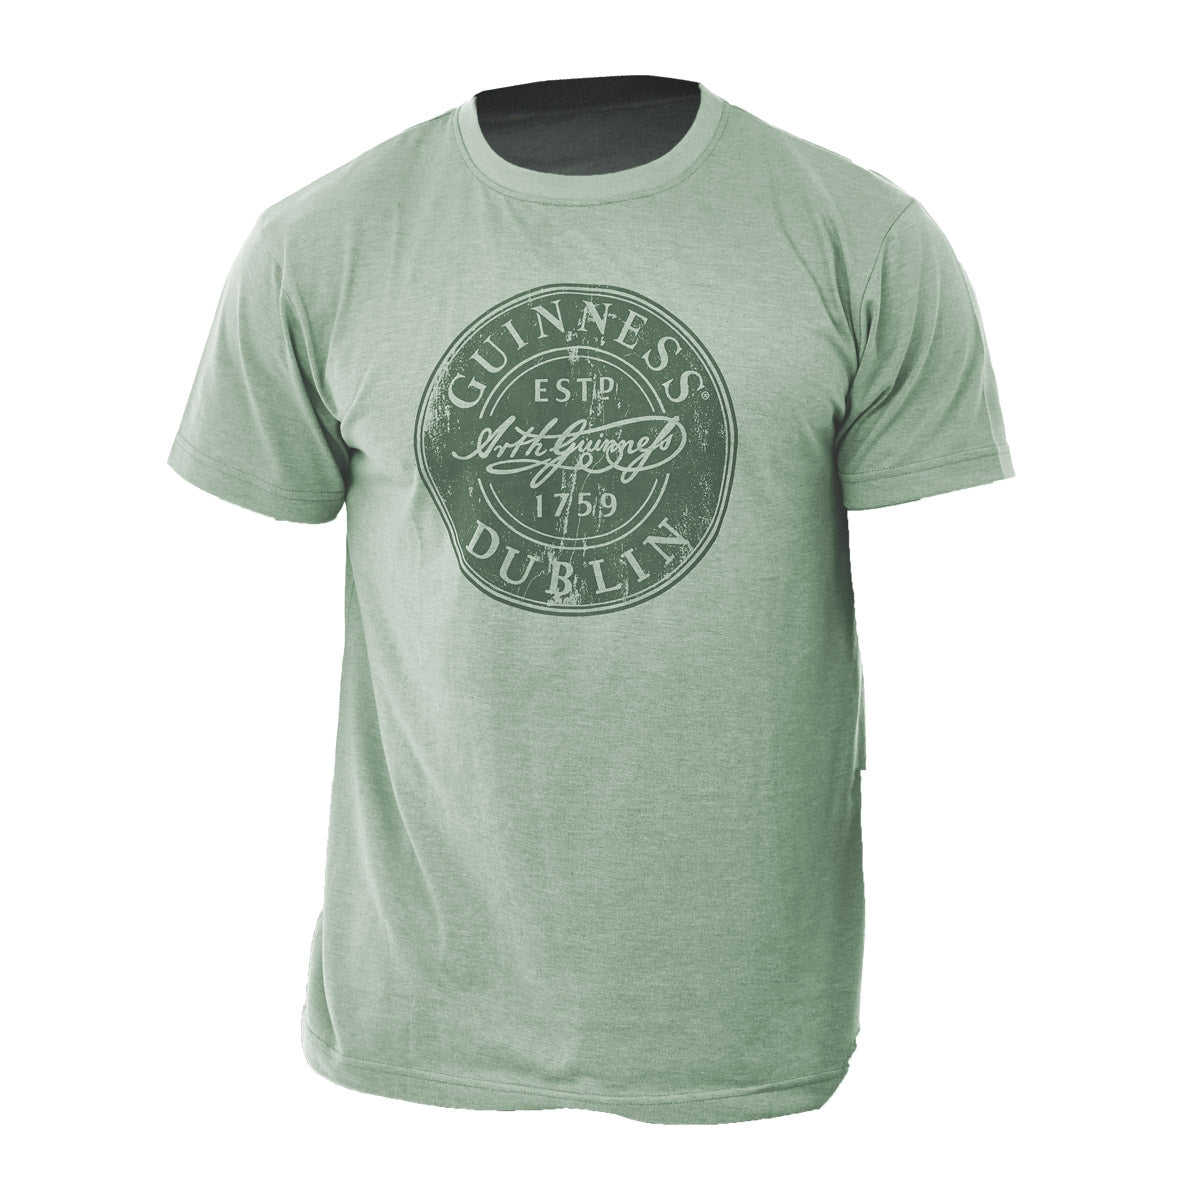 A Guinness Green Bottle Cap Tee with the words Guinness and Dublin on it.